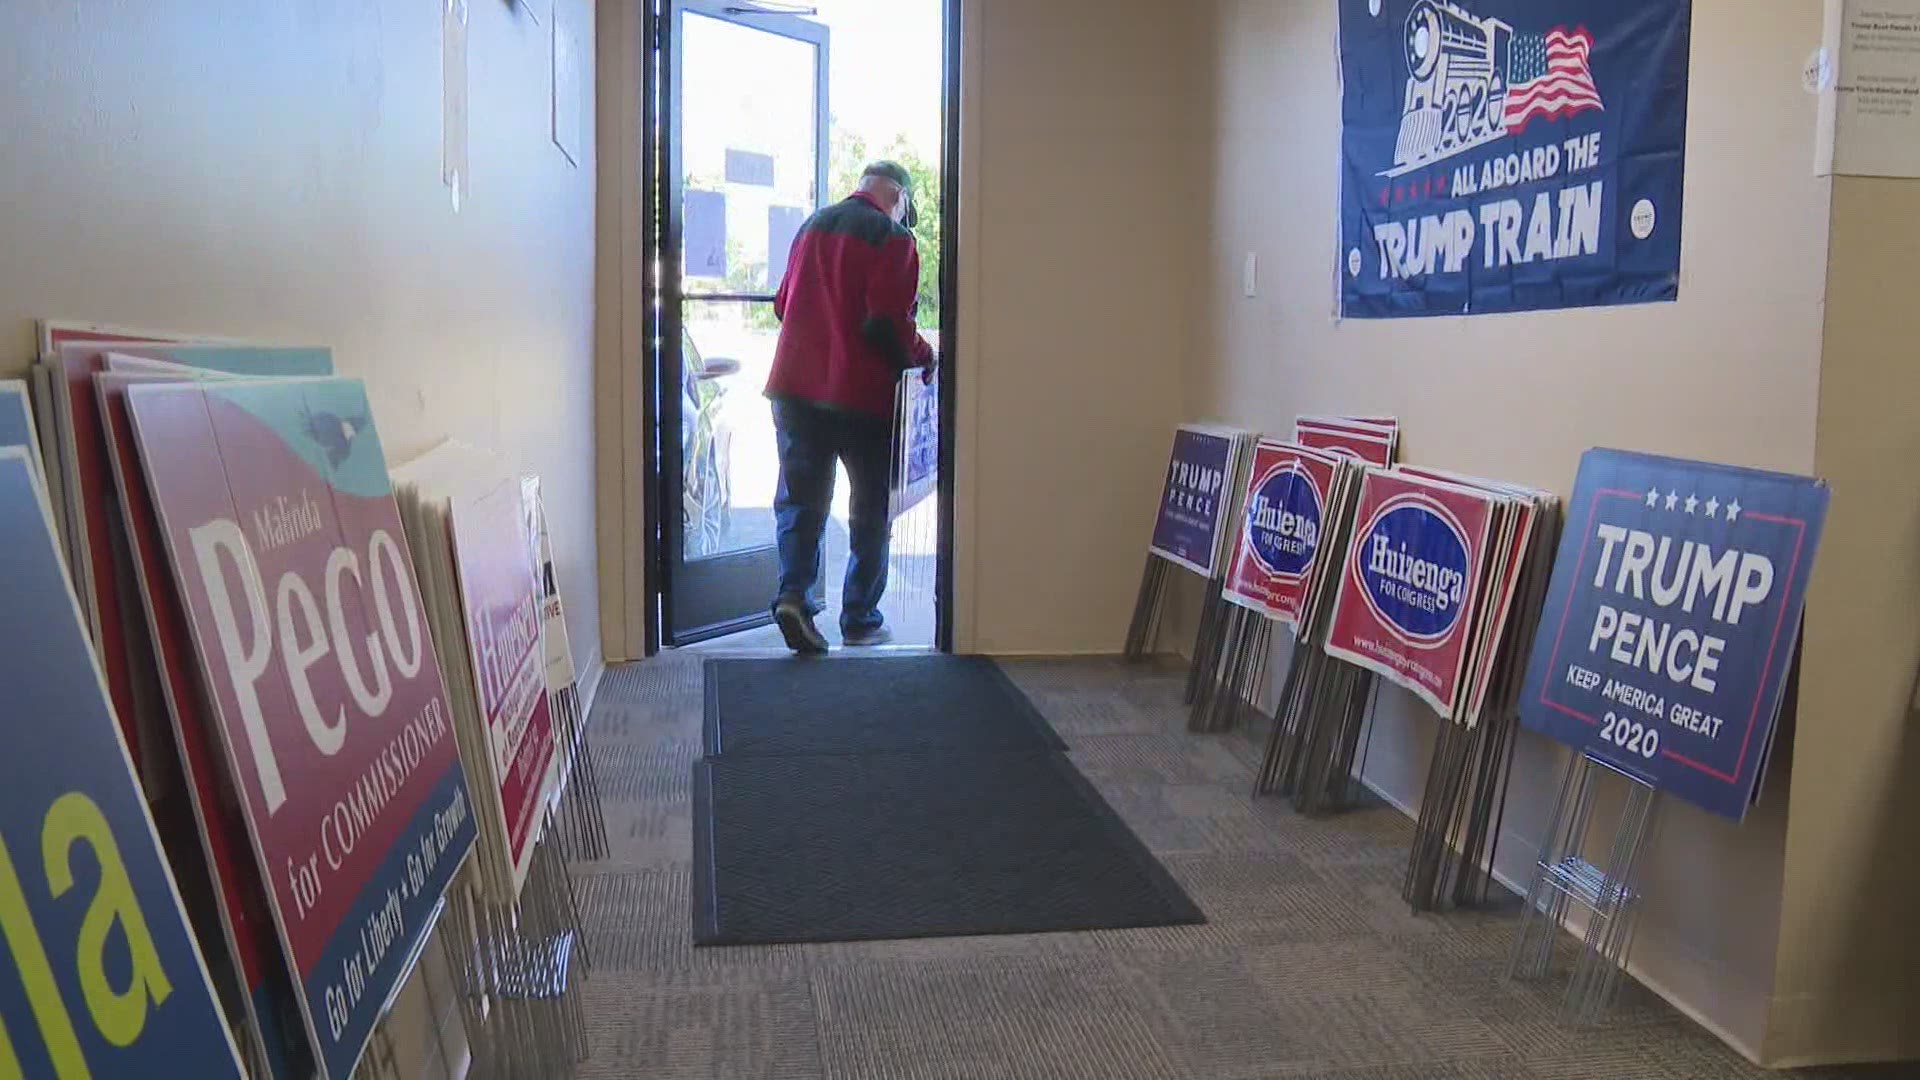 Muskegon County is a battleground county. Local Democrats and Republicans look ahead to the upcoming election.